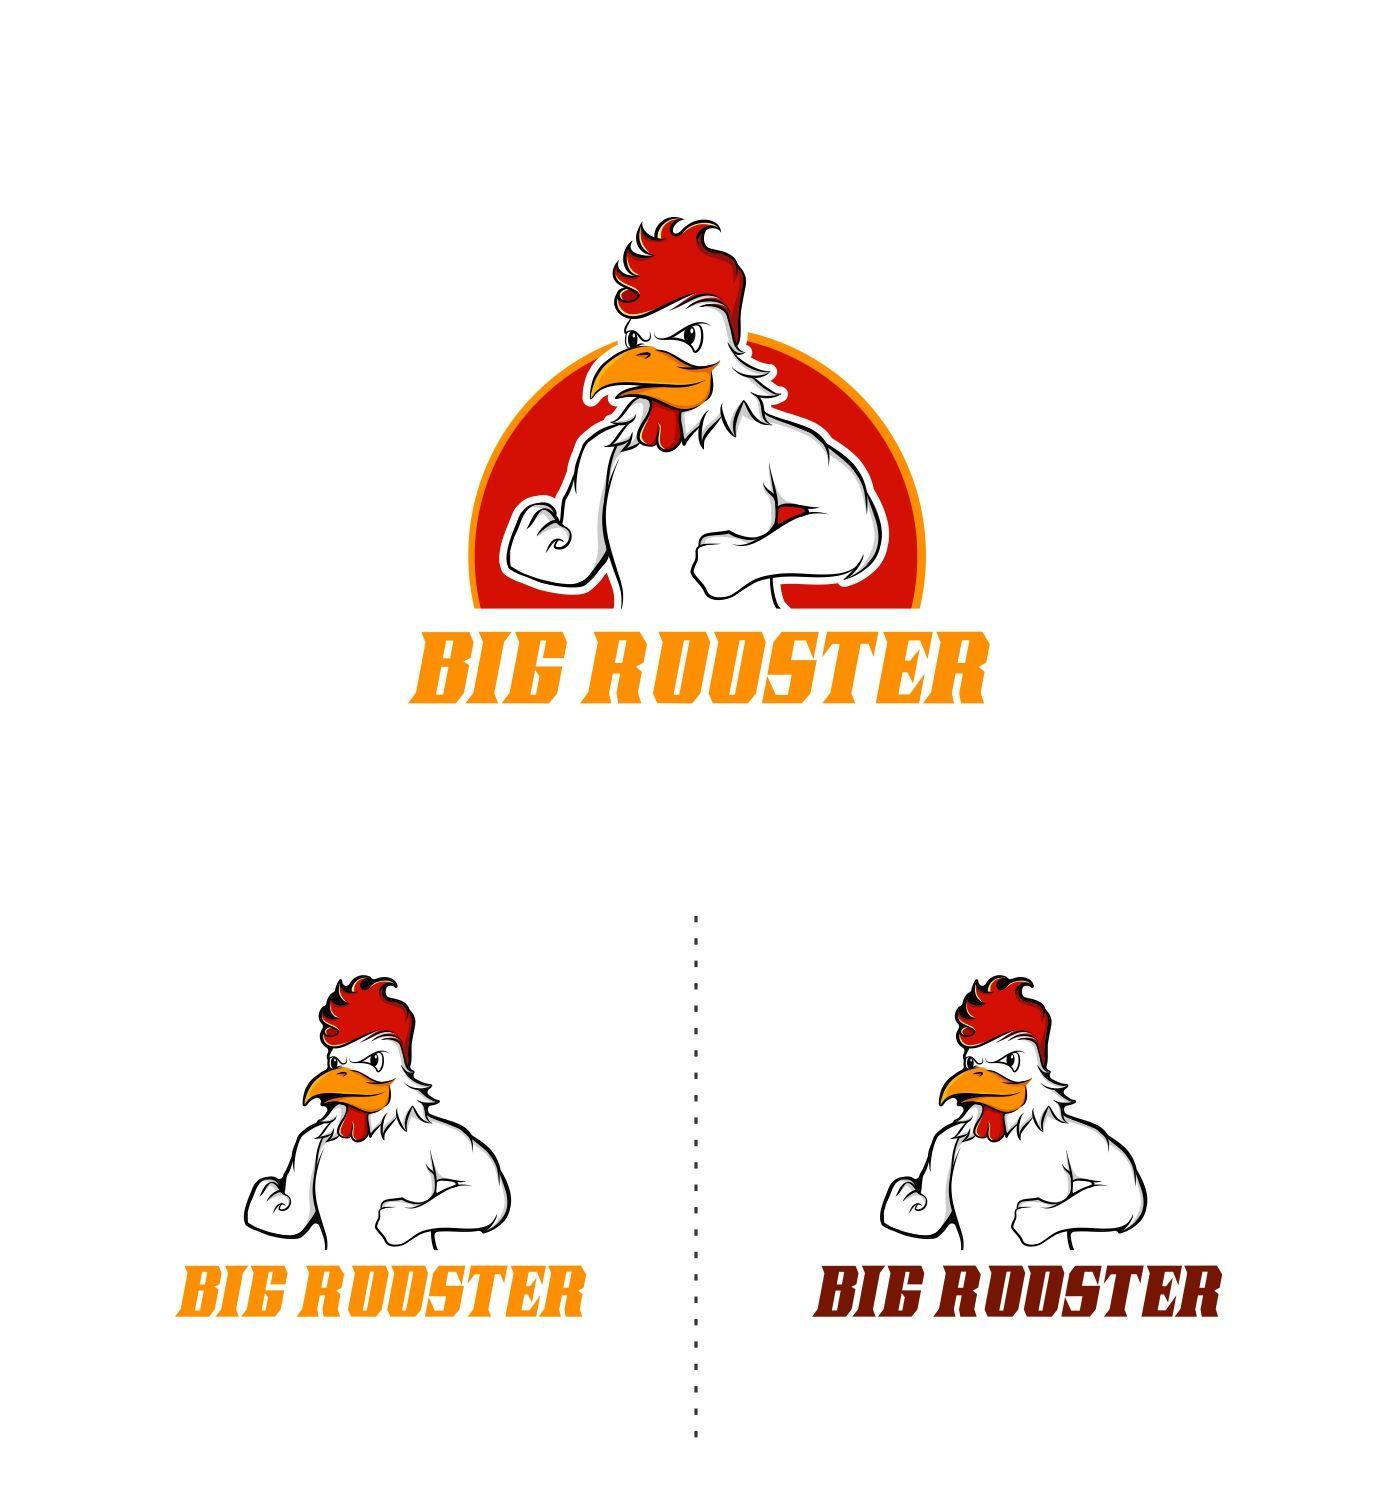 Food Chain Logo - Feminine, Modern, Fast Food Chain Logo Design for Big Rooster by ...